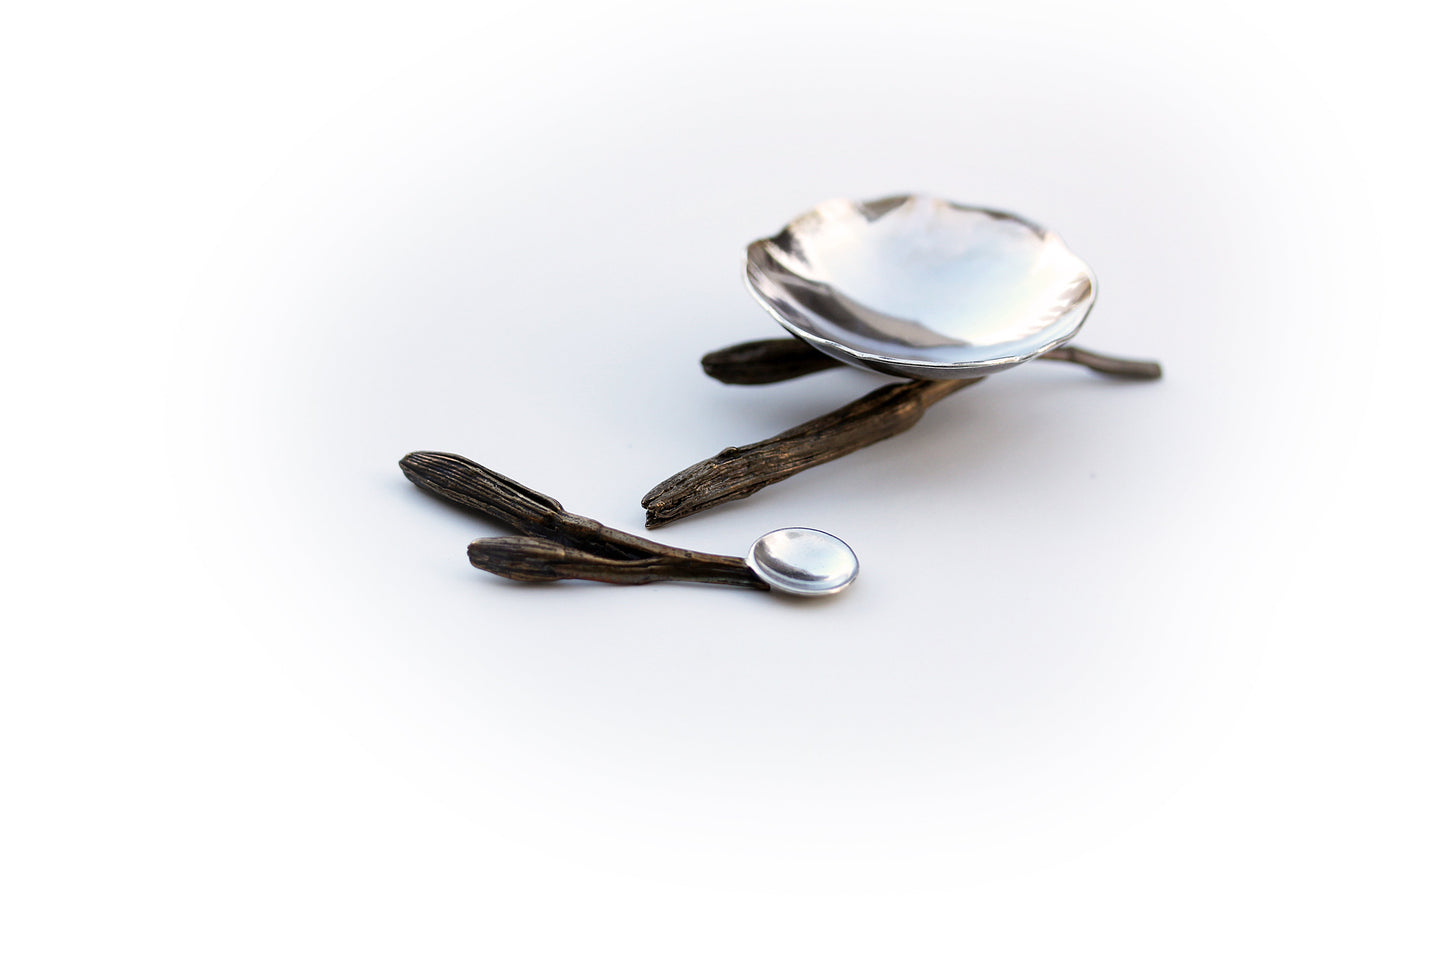 Handmade Salt Cellar or tiny serving dish in Sterling Silver and cast lily bud harvested in Greenville SC